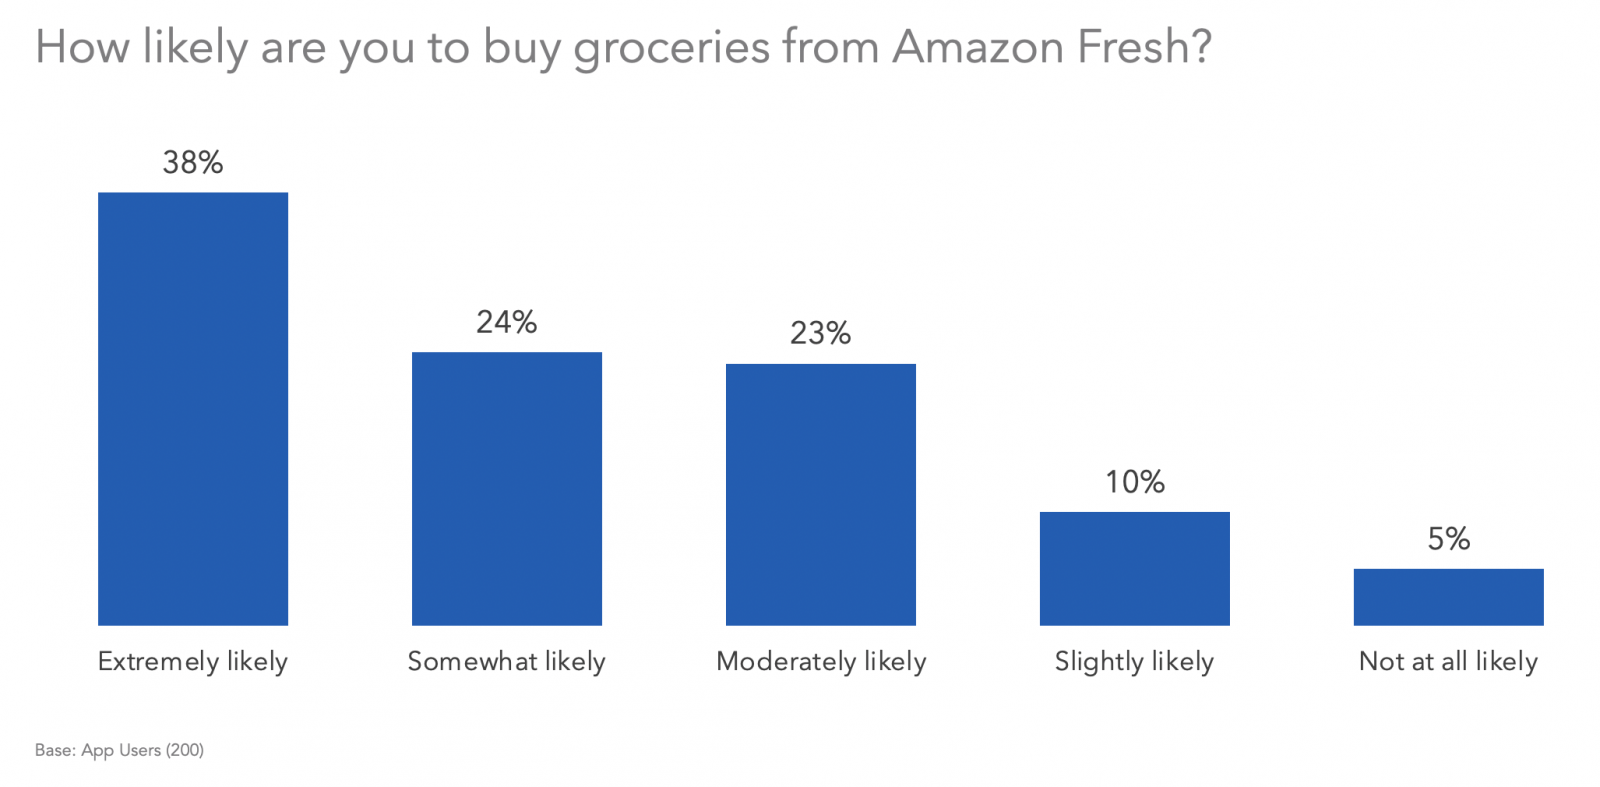 How likely are you to buy groceries from Amazon Fresh?